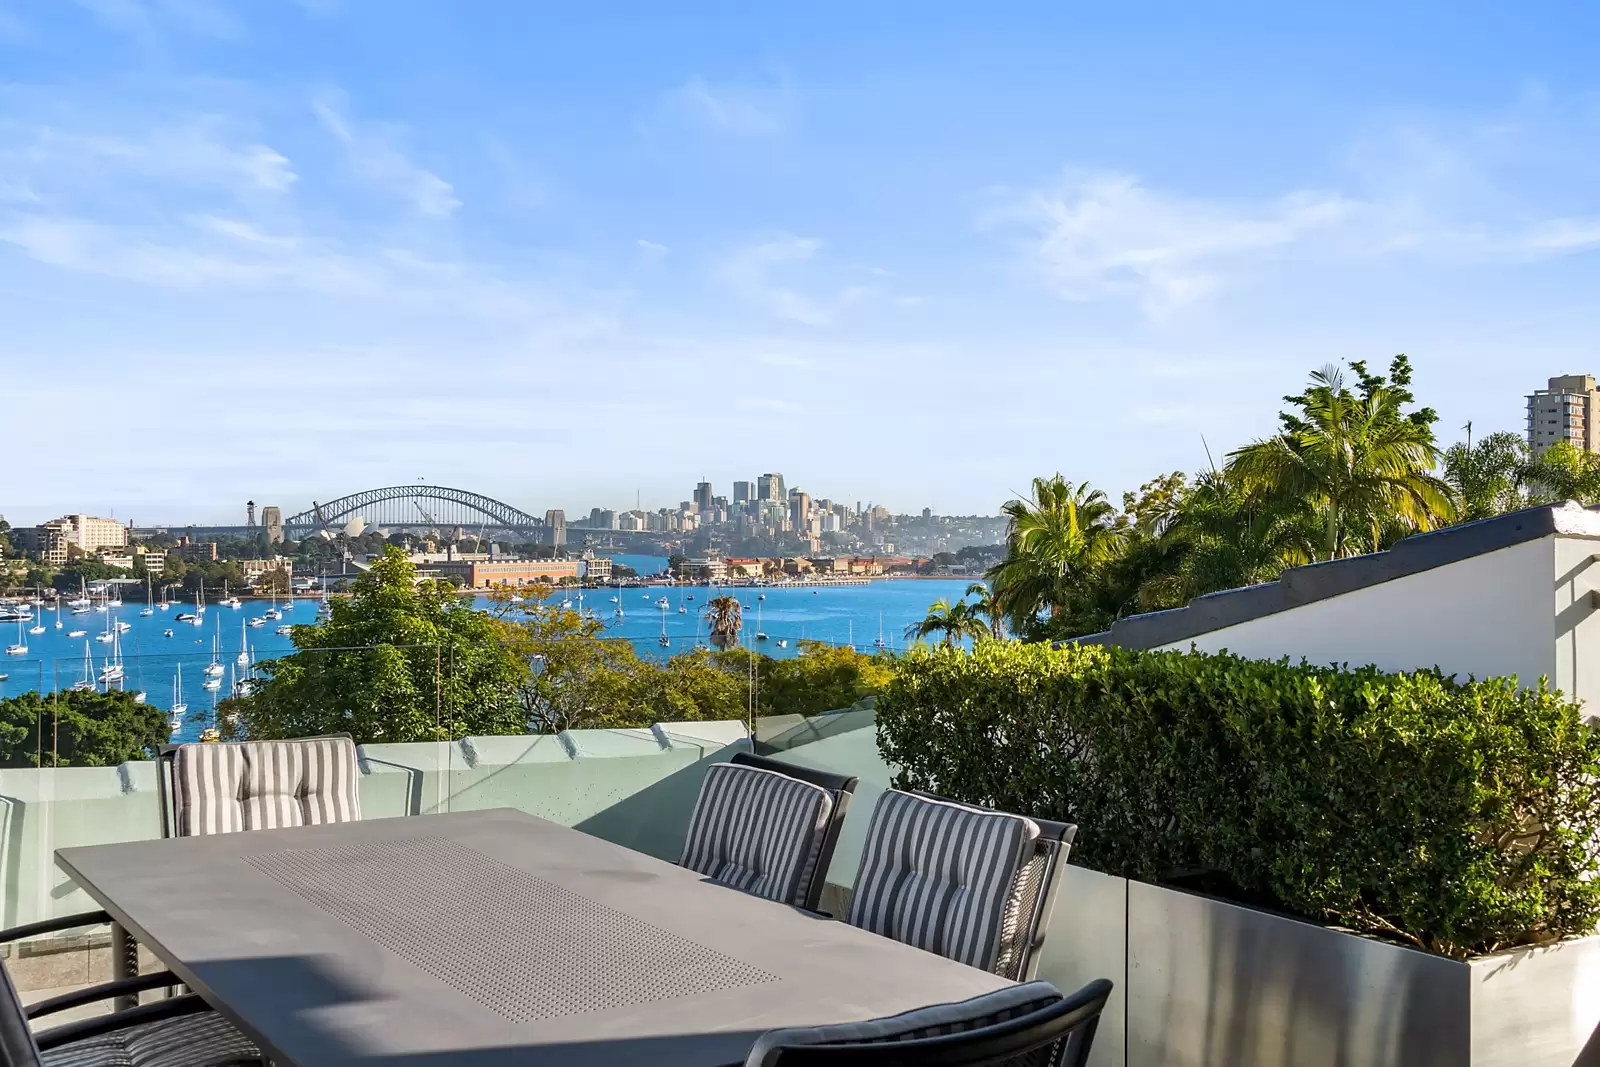 Photo #16: 5/38 Darling Point Road, Darling Point - Sold by Sydney Sotheby's International Realty